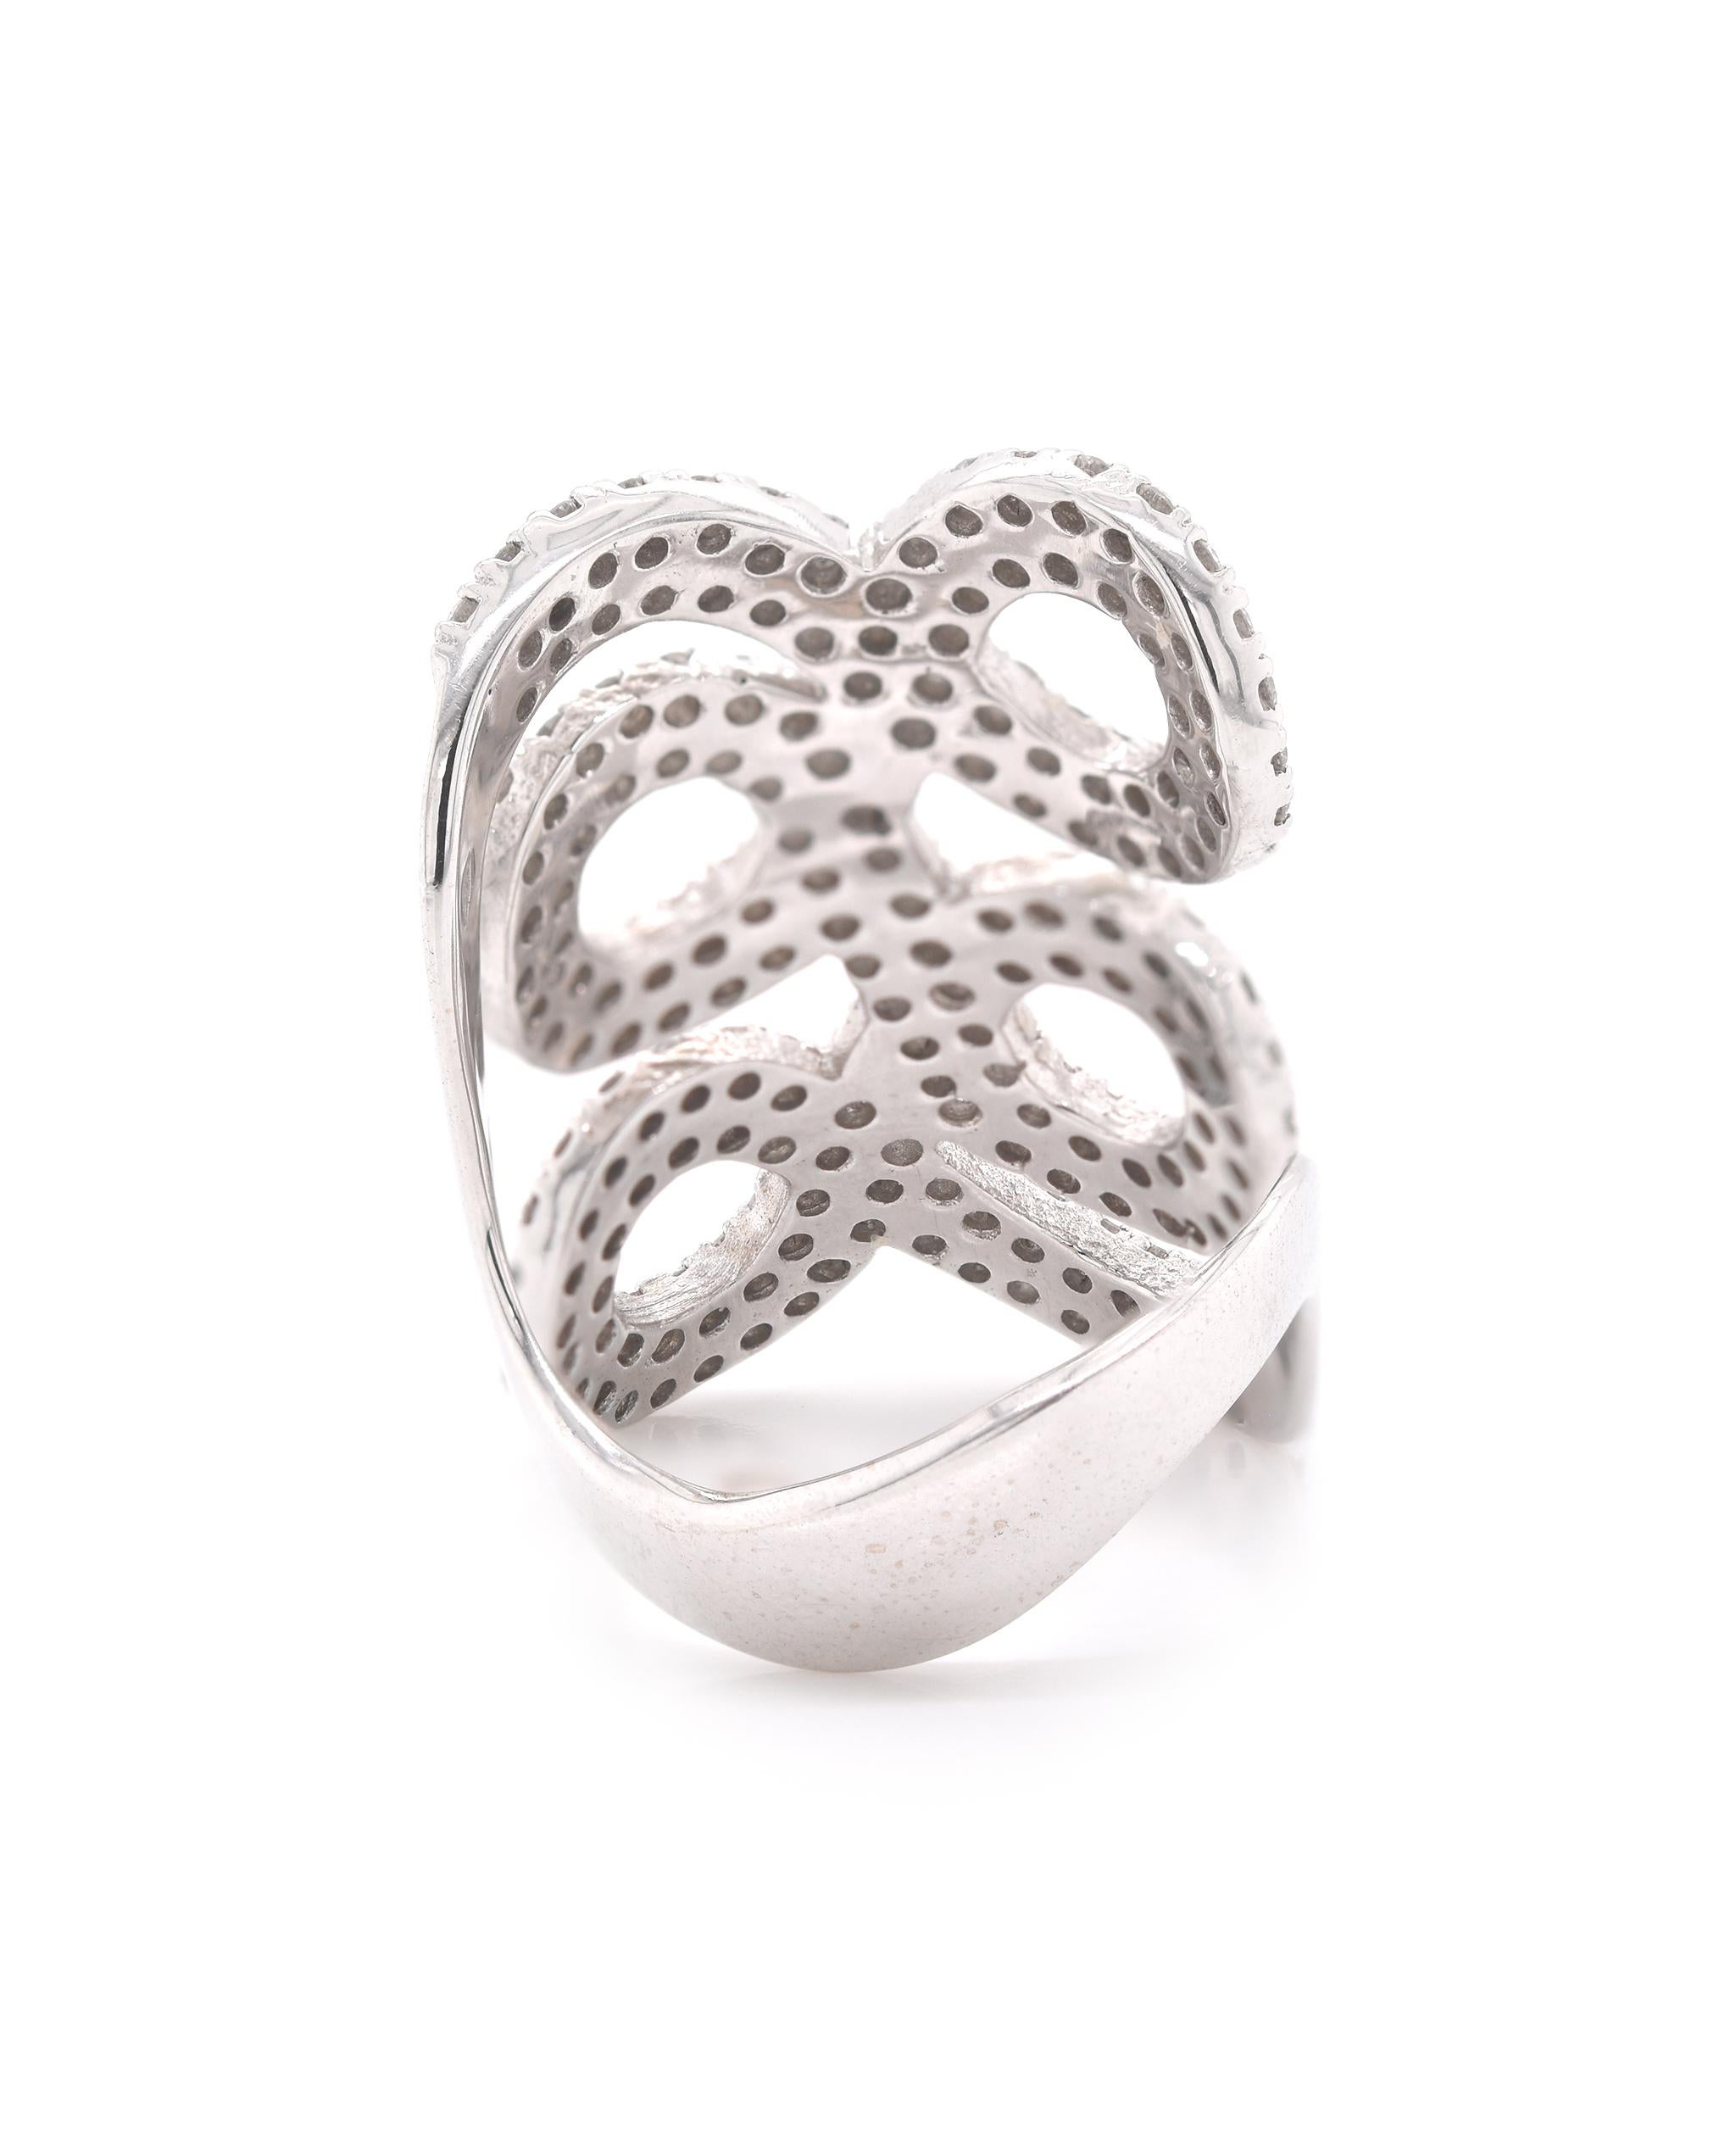 14 Karat White Gold Pave Diamond Swirl Ring In Excellent Condition For Sale In Scottsdale, AZ